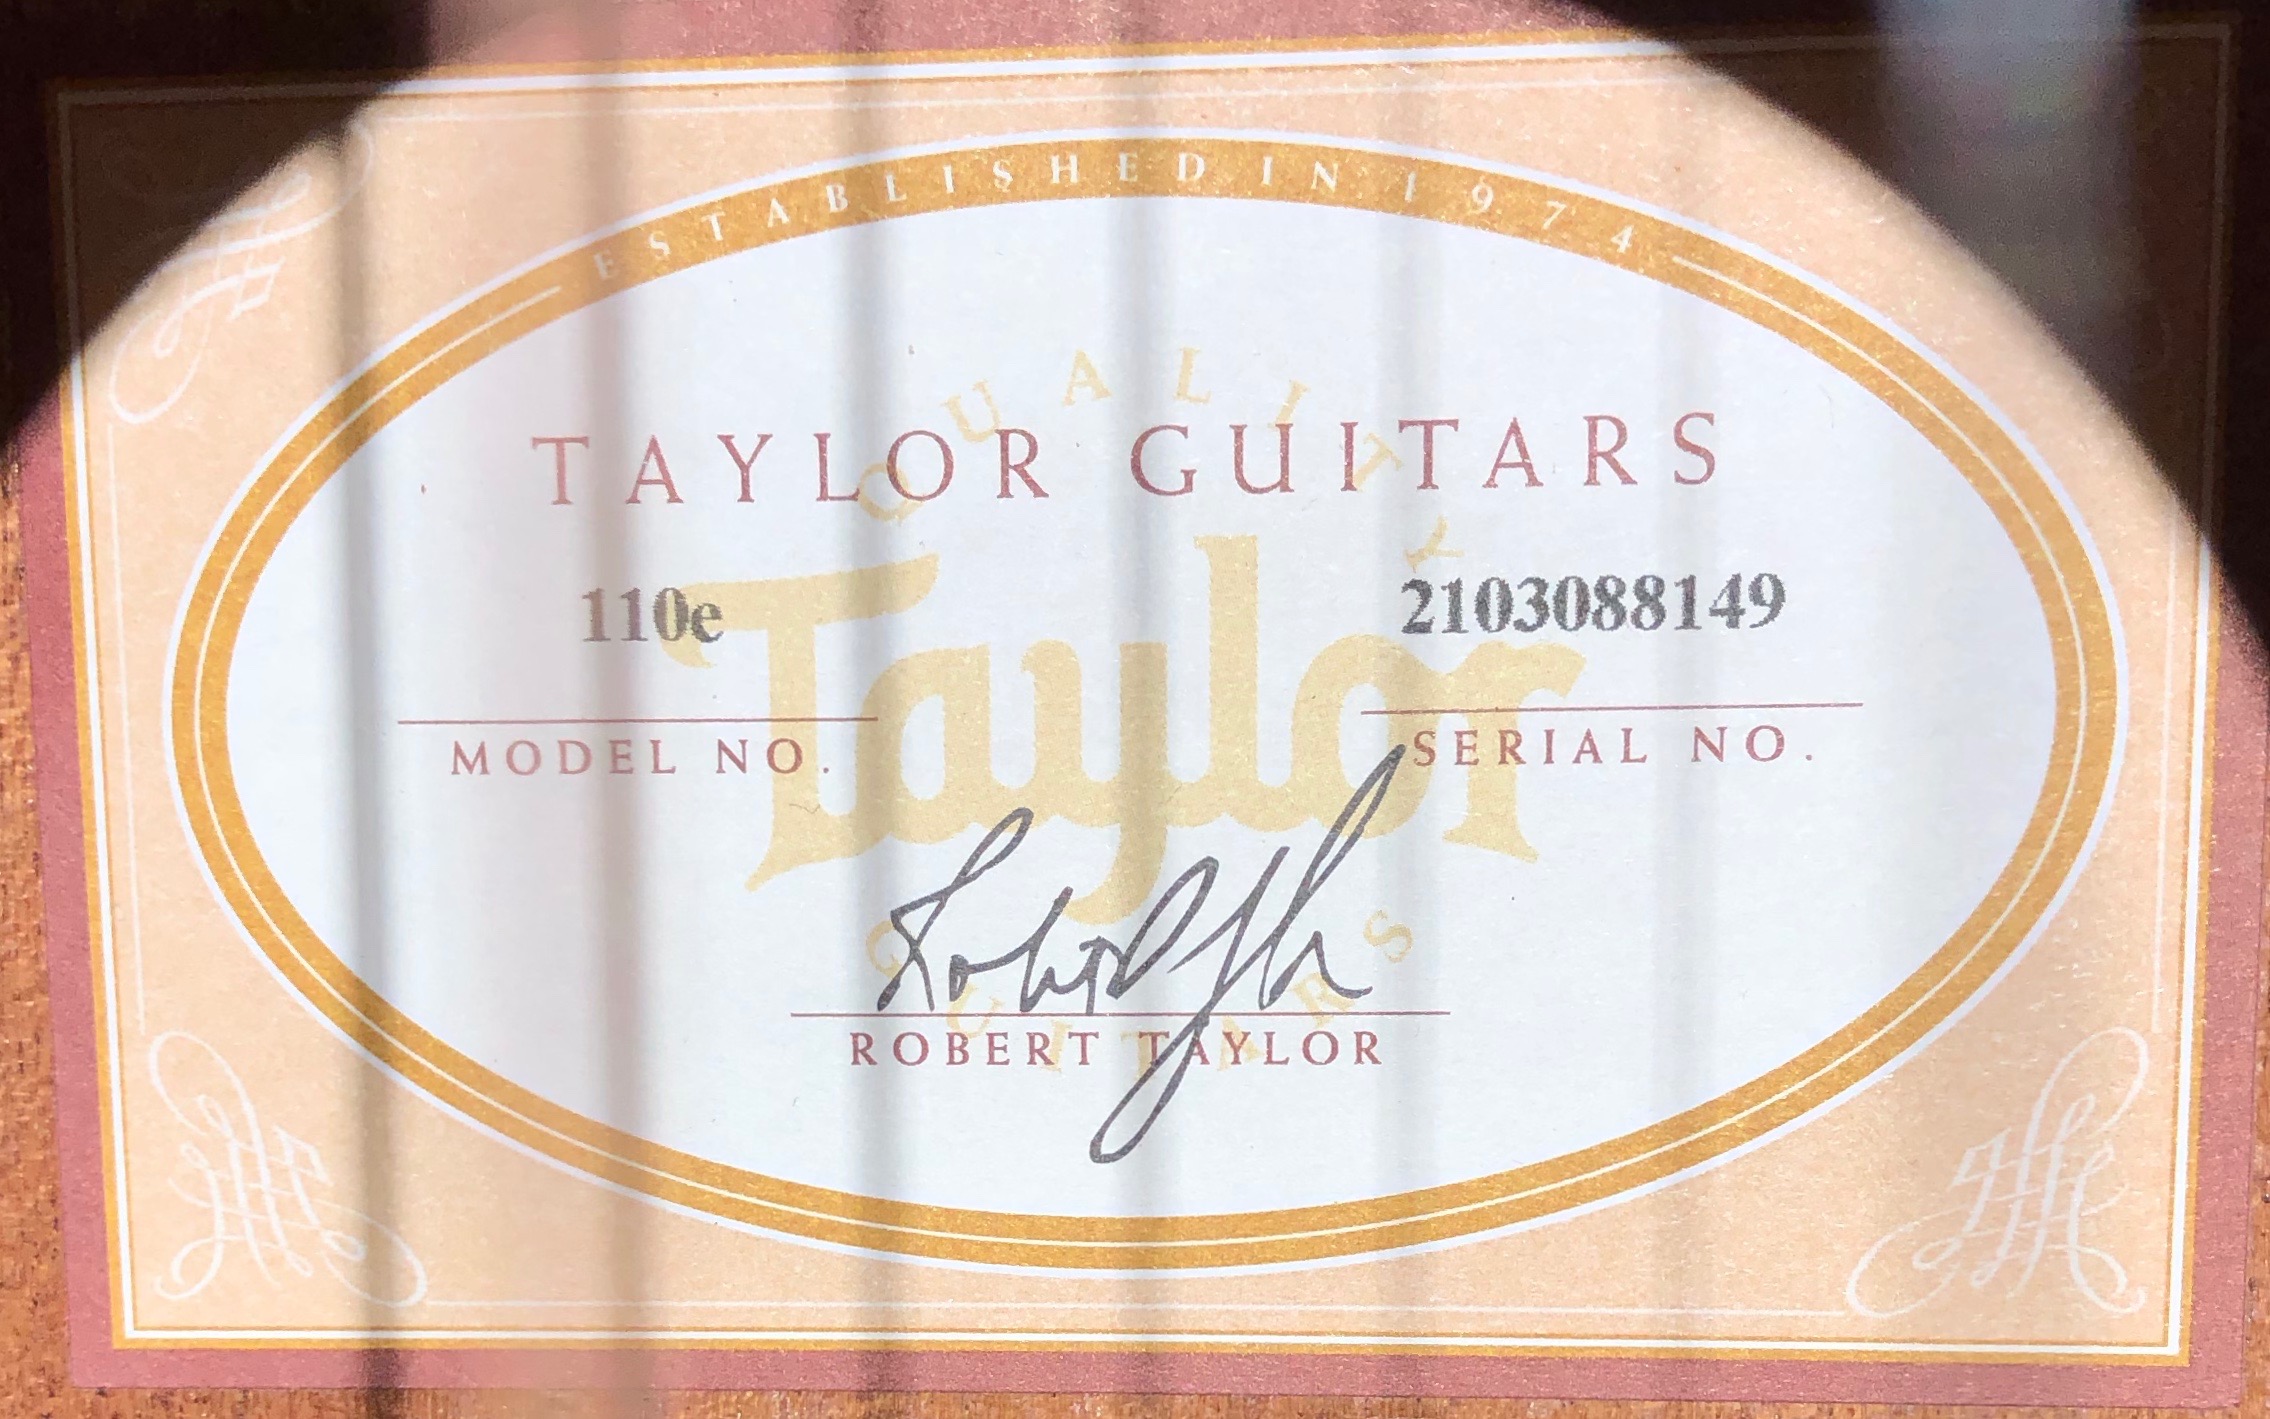 dating taylor guitar by serial